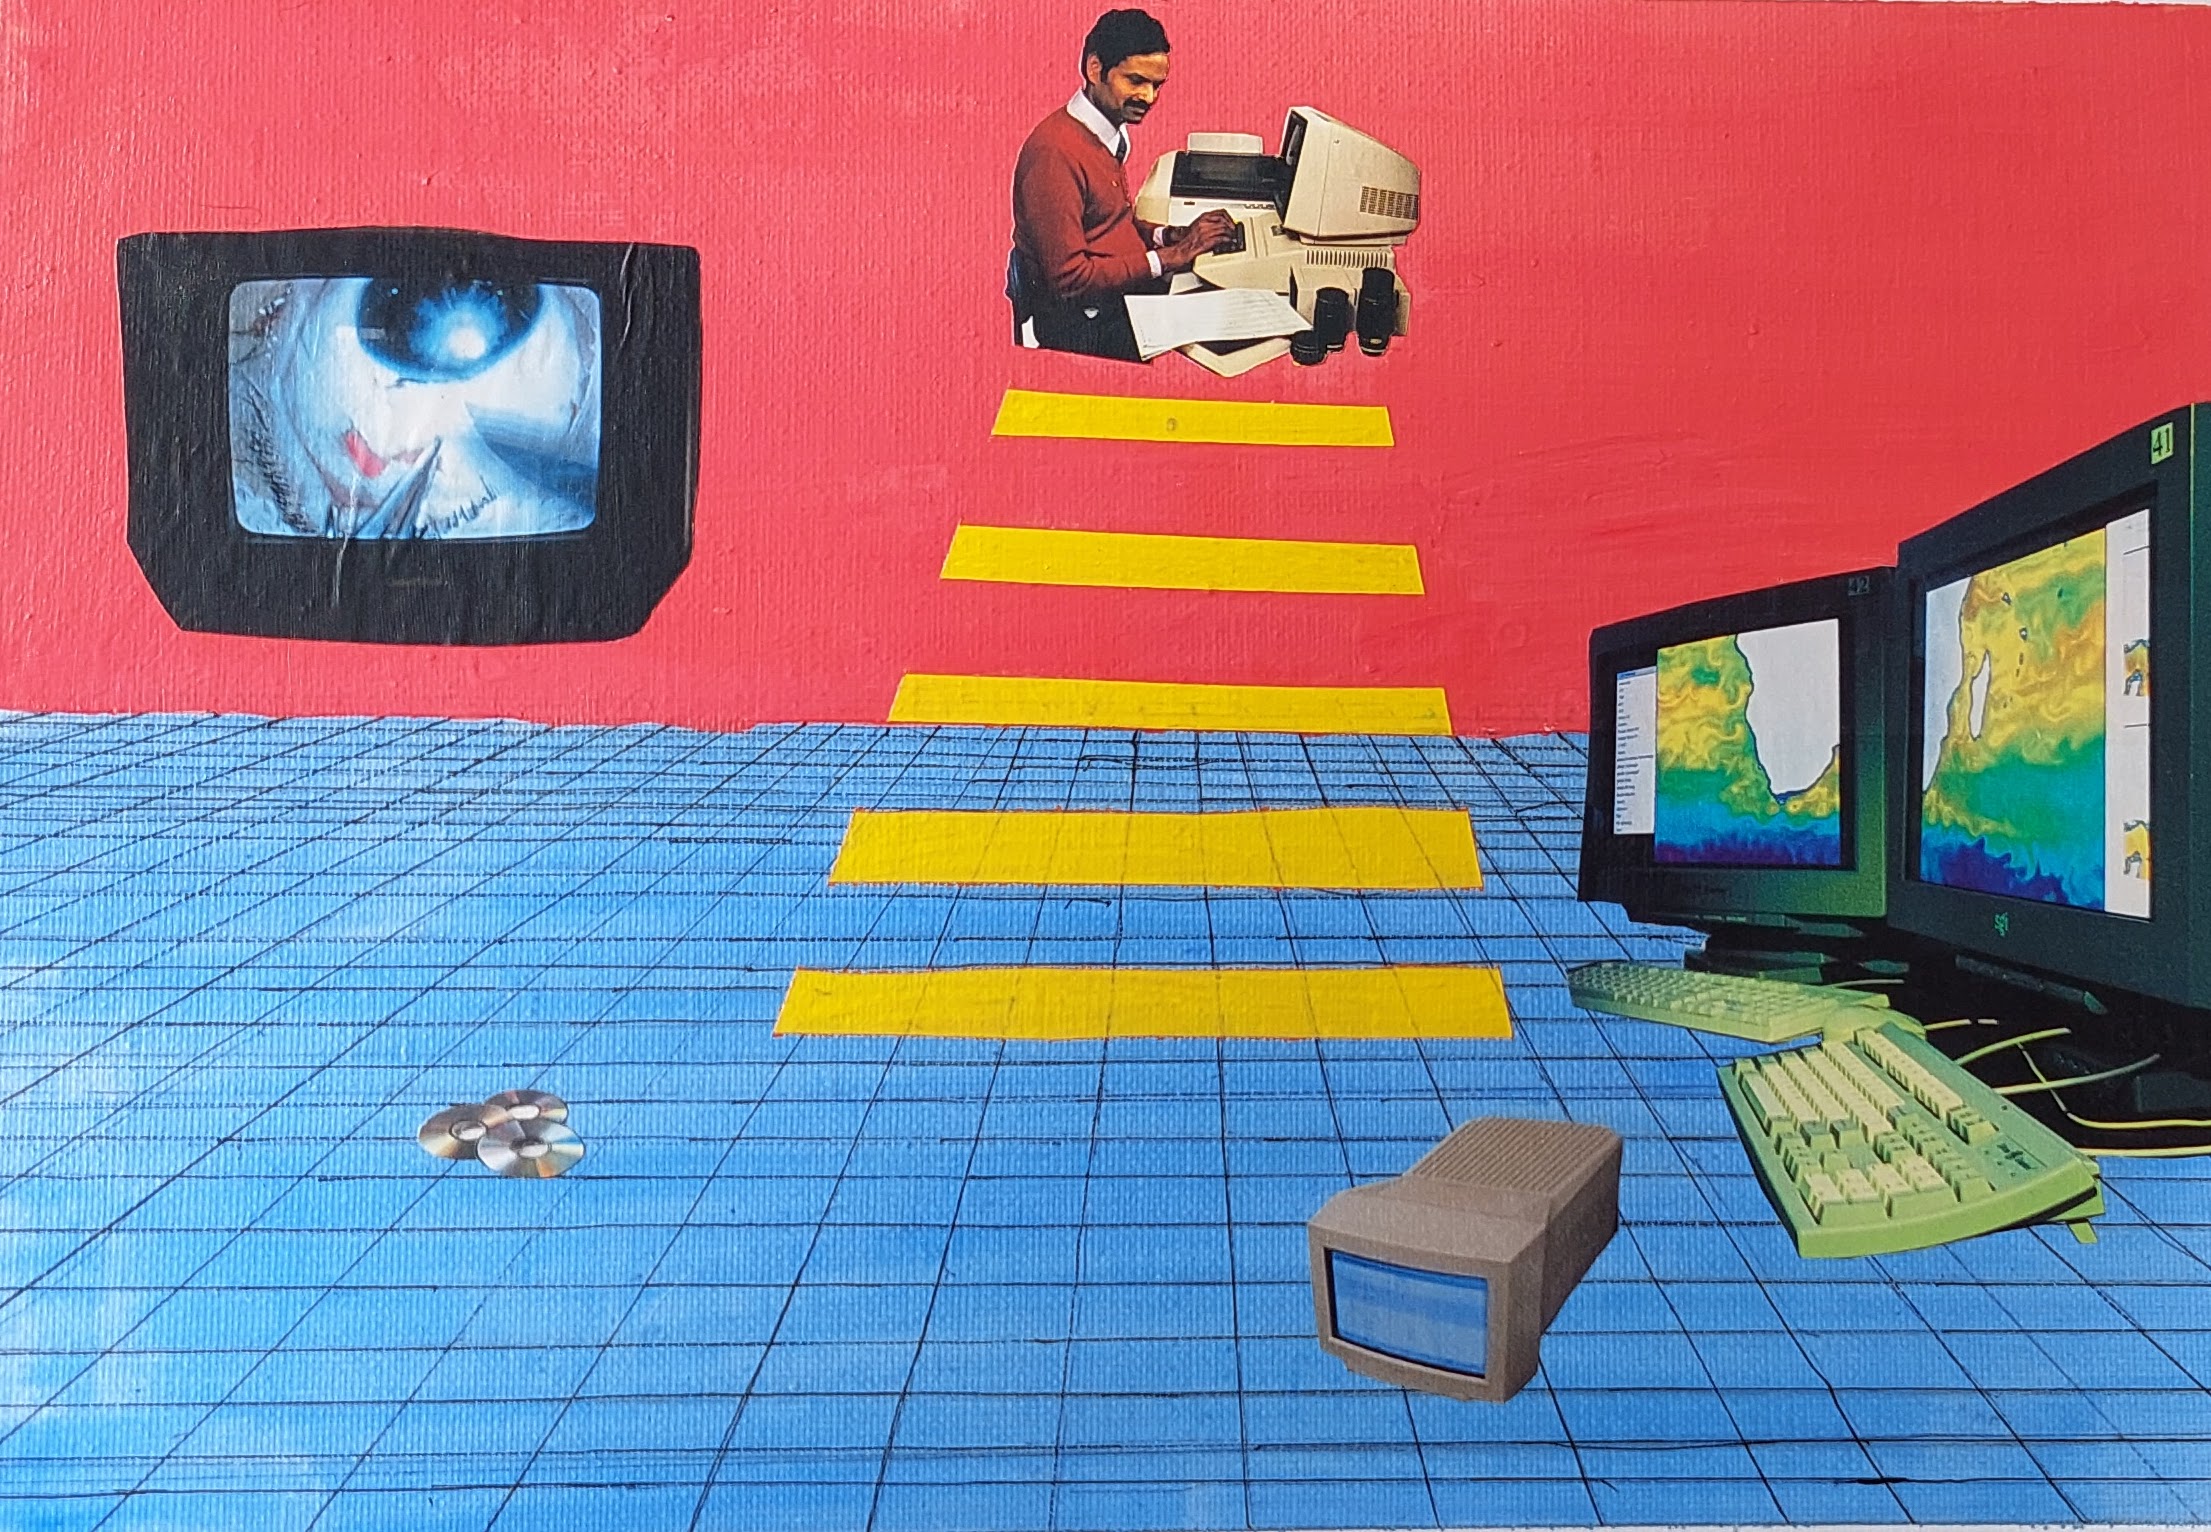 Mixed Media collage, acrylic, and ink, depicts several older computers, a screen from an eye surgery, and a man on an old computer